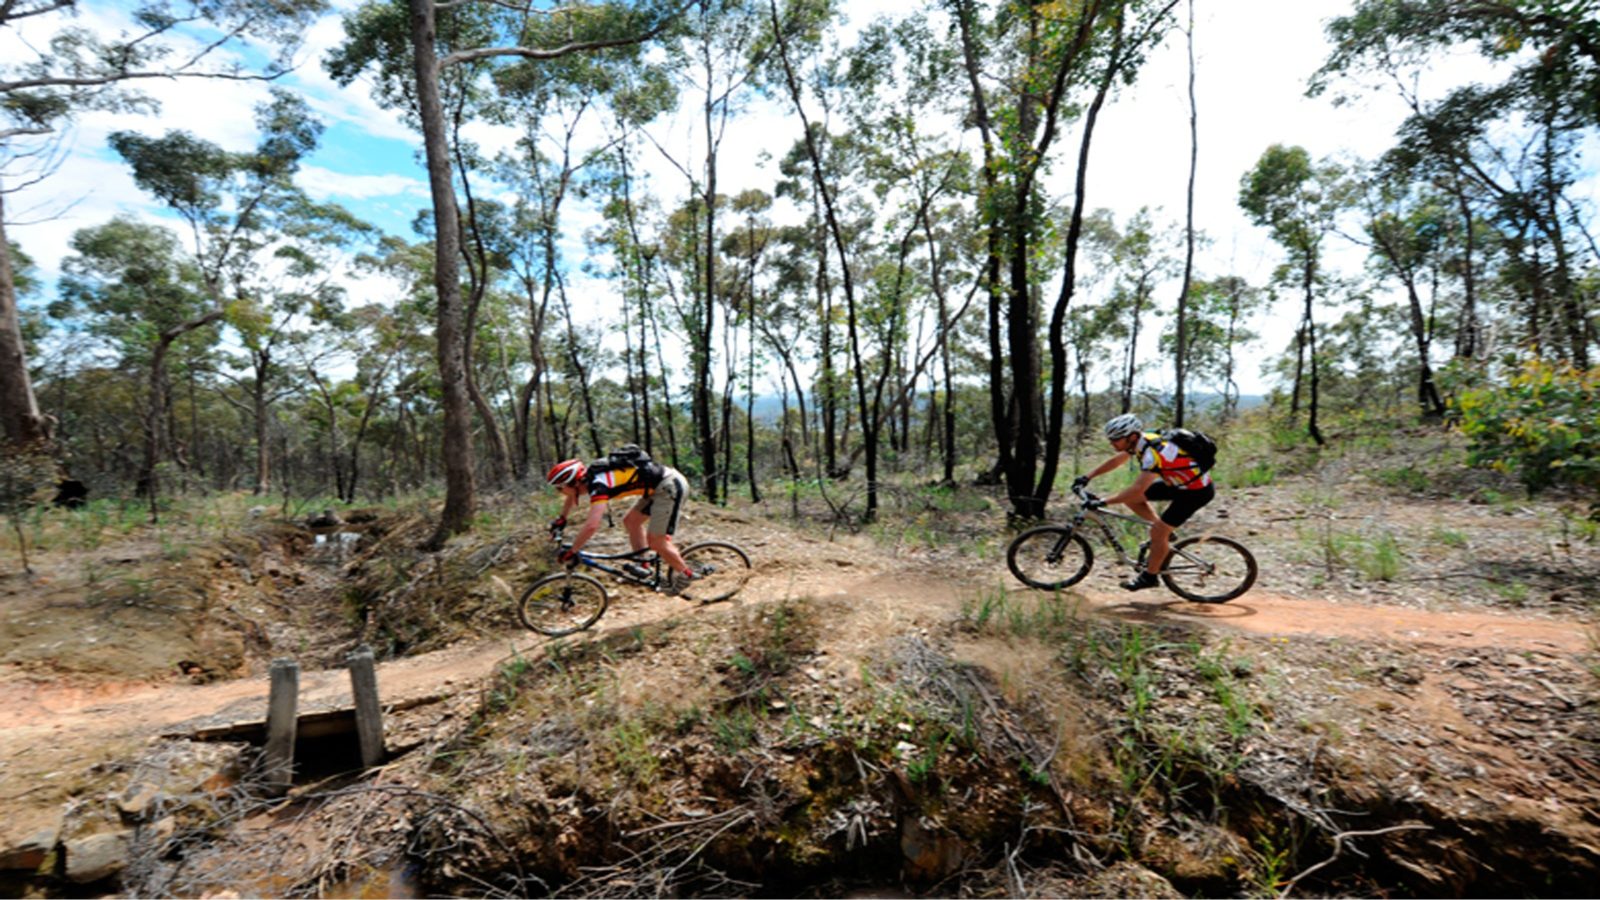 two cyclists on dusty track in forest with trees and blue skies in background